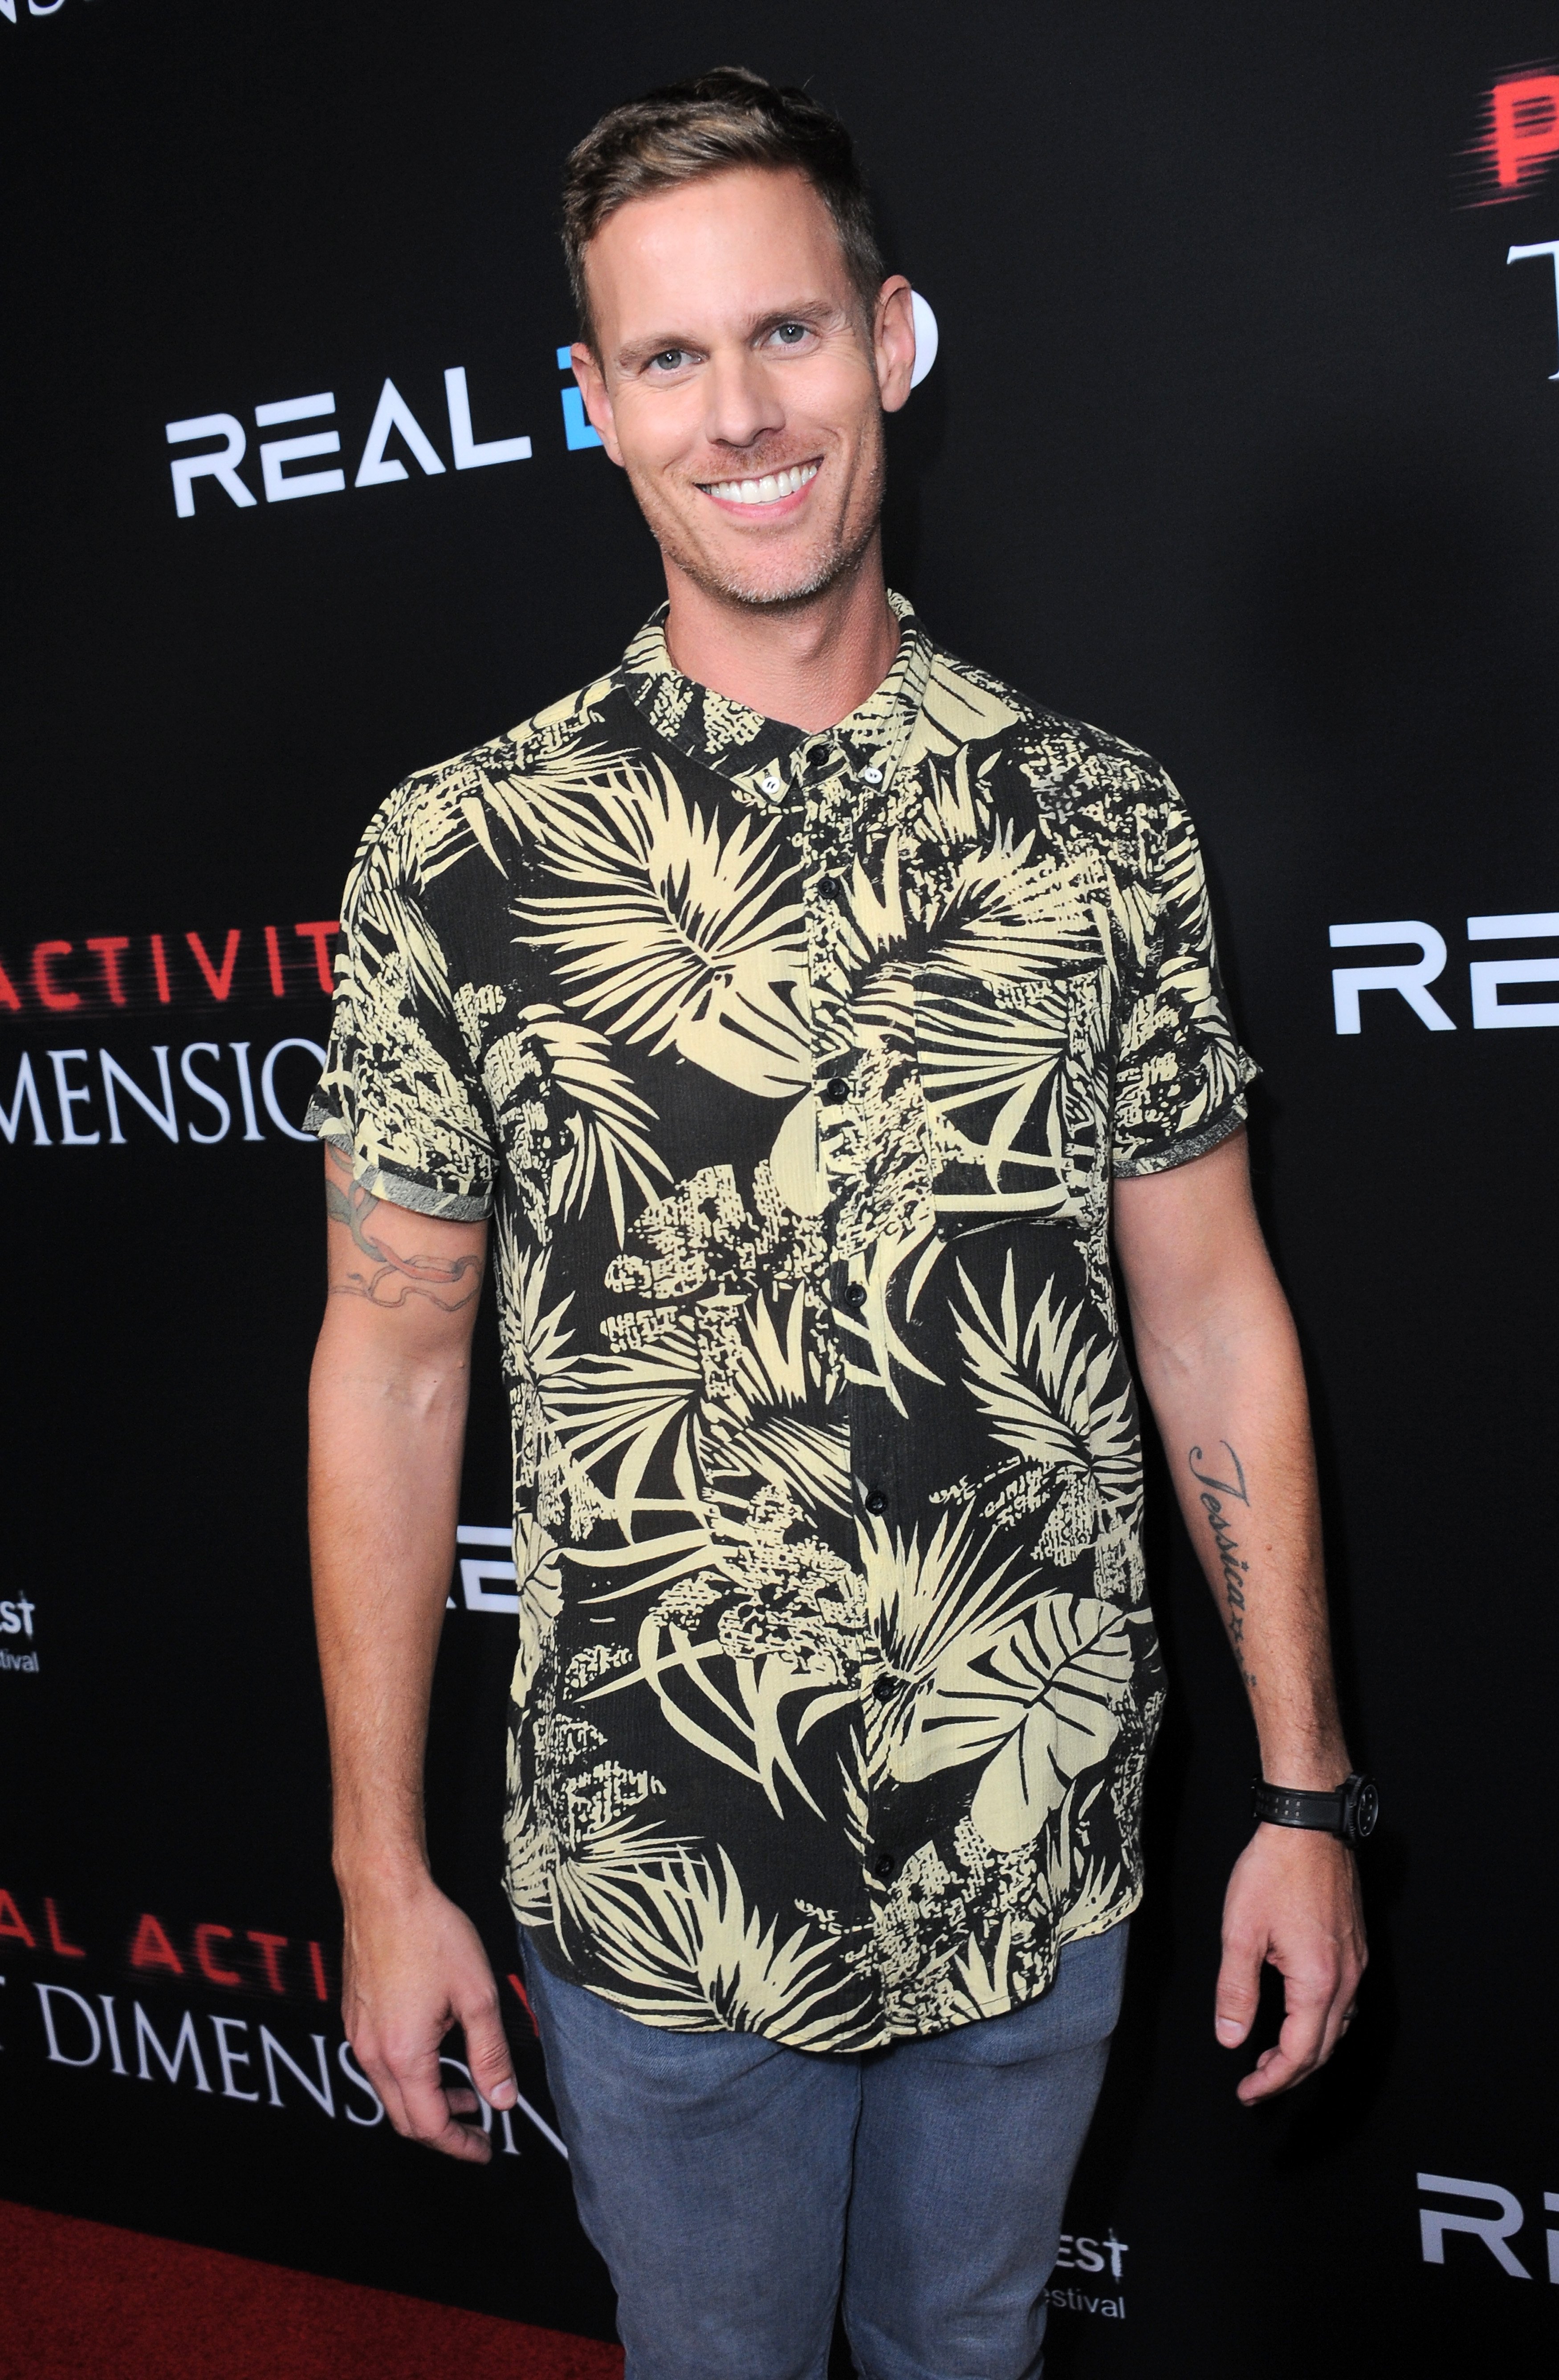 Christopher Landon at the Screamfest Closing Night - Screening Of "Paranormal Activity: The Ghost Dimension" on October 22, 2015 in Hollywood, California. | Source: Getty Images